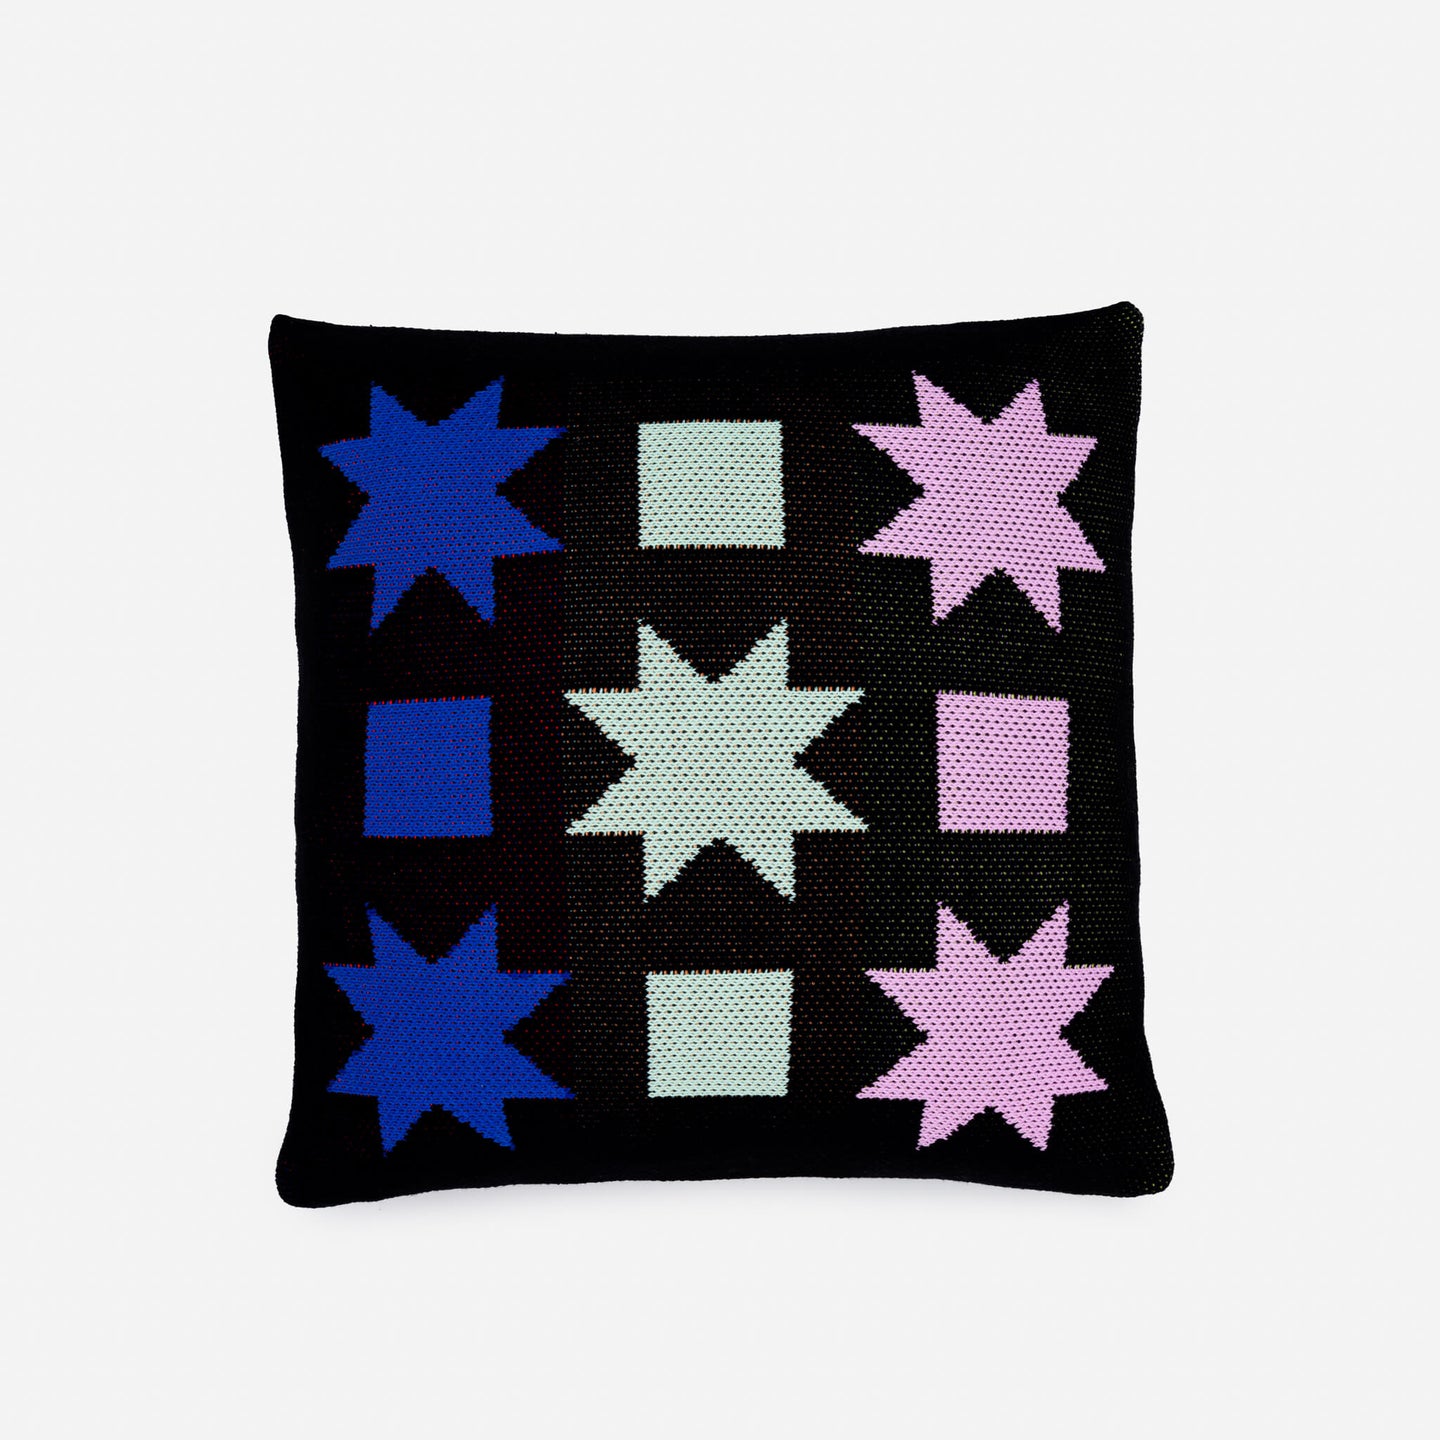 Quilt Star Pillow Knit Cover Graphic Bold Accent